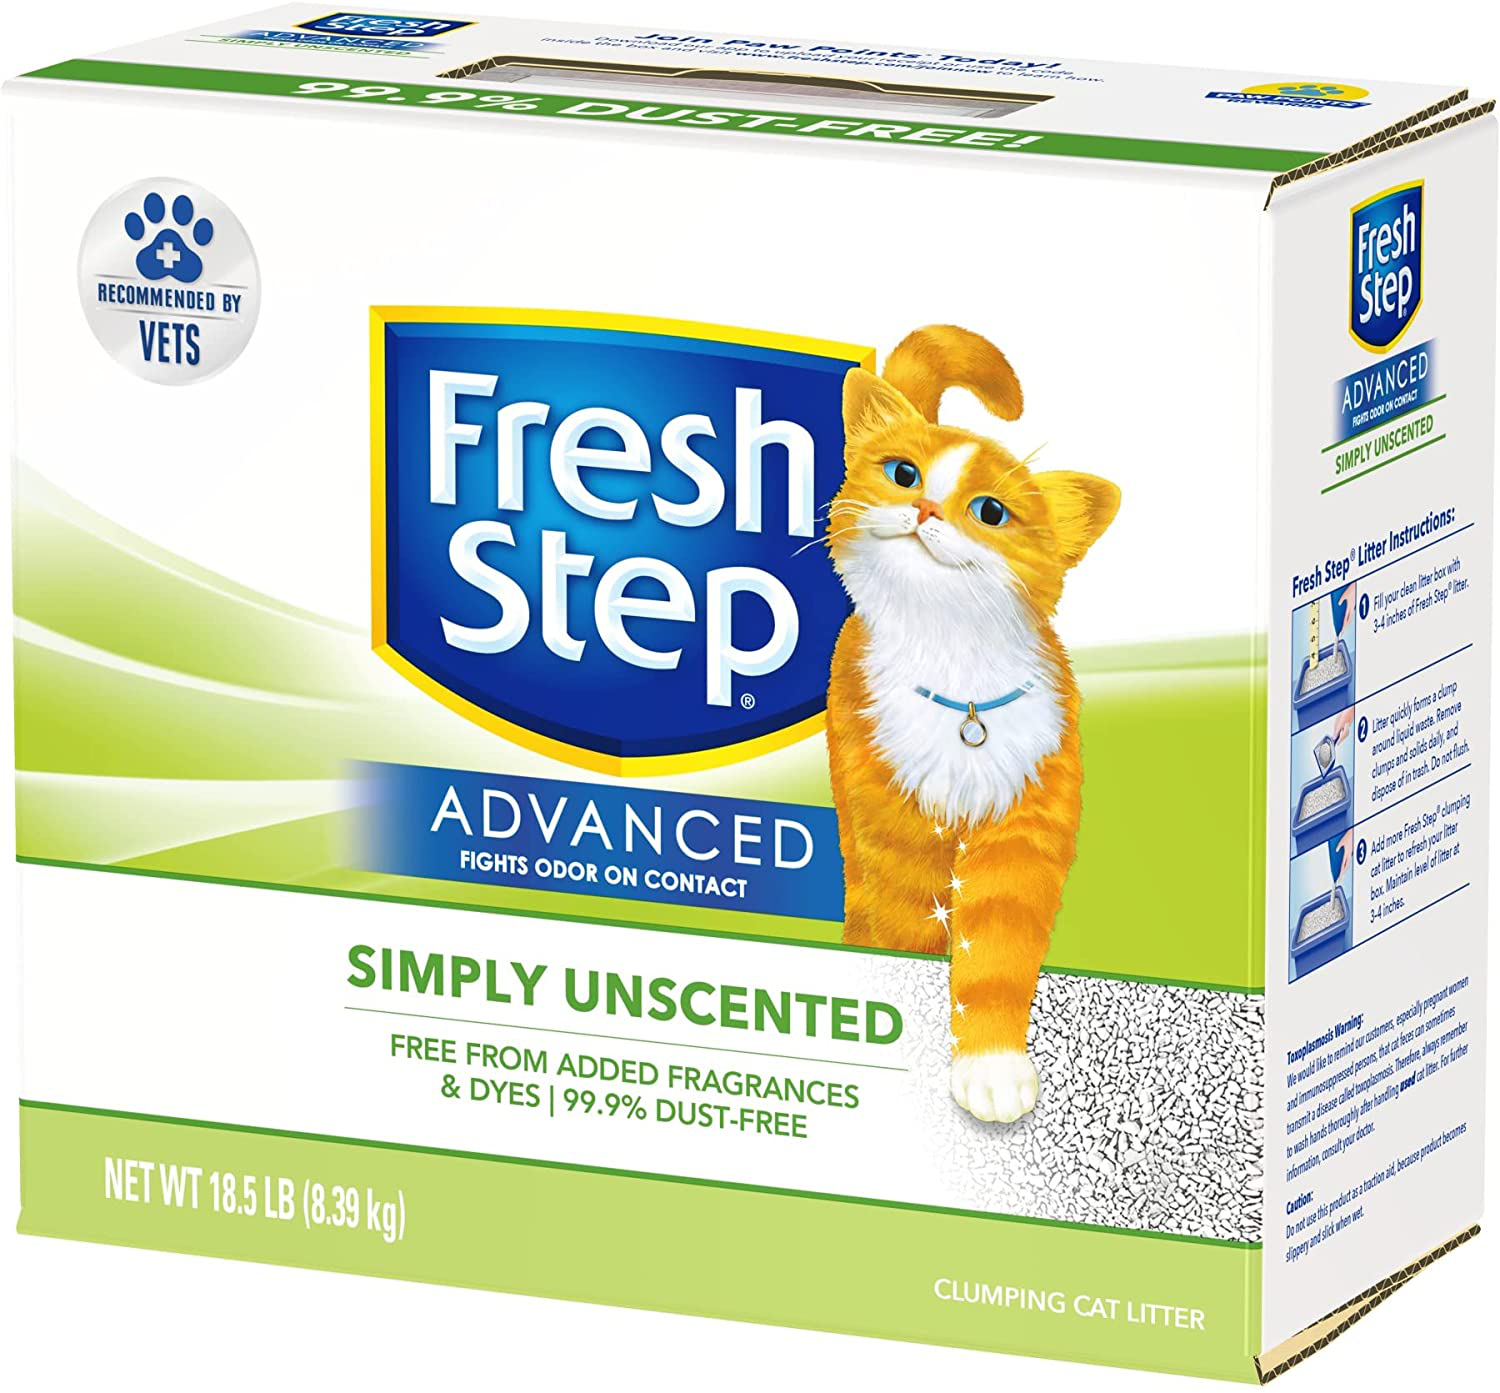 Fresh Step Advanced Simply Unscented Clumping Cat Litter, Recommended by Vets Animals & Pet Supplies > Pet Supplies > Cat Supplies > Cat Litter Fresh Step New! Advanced Unscented 18.5 lb 